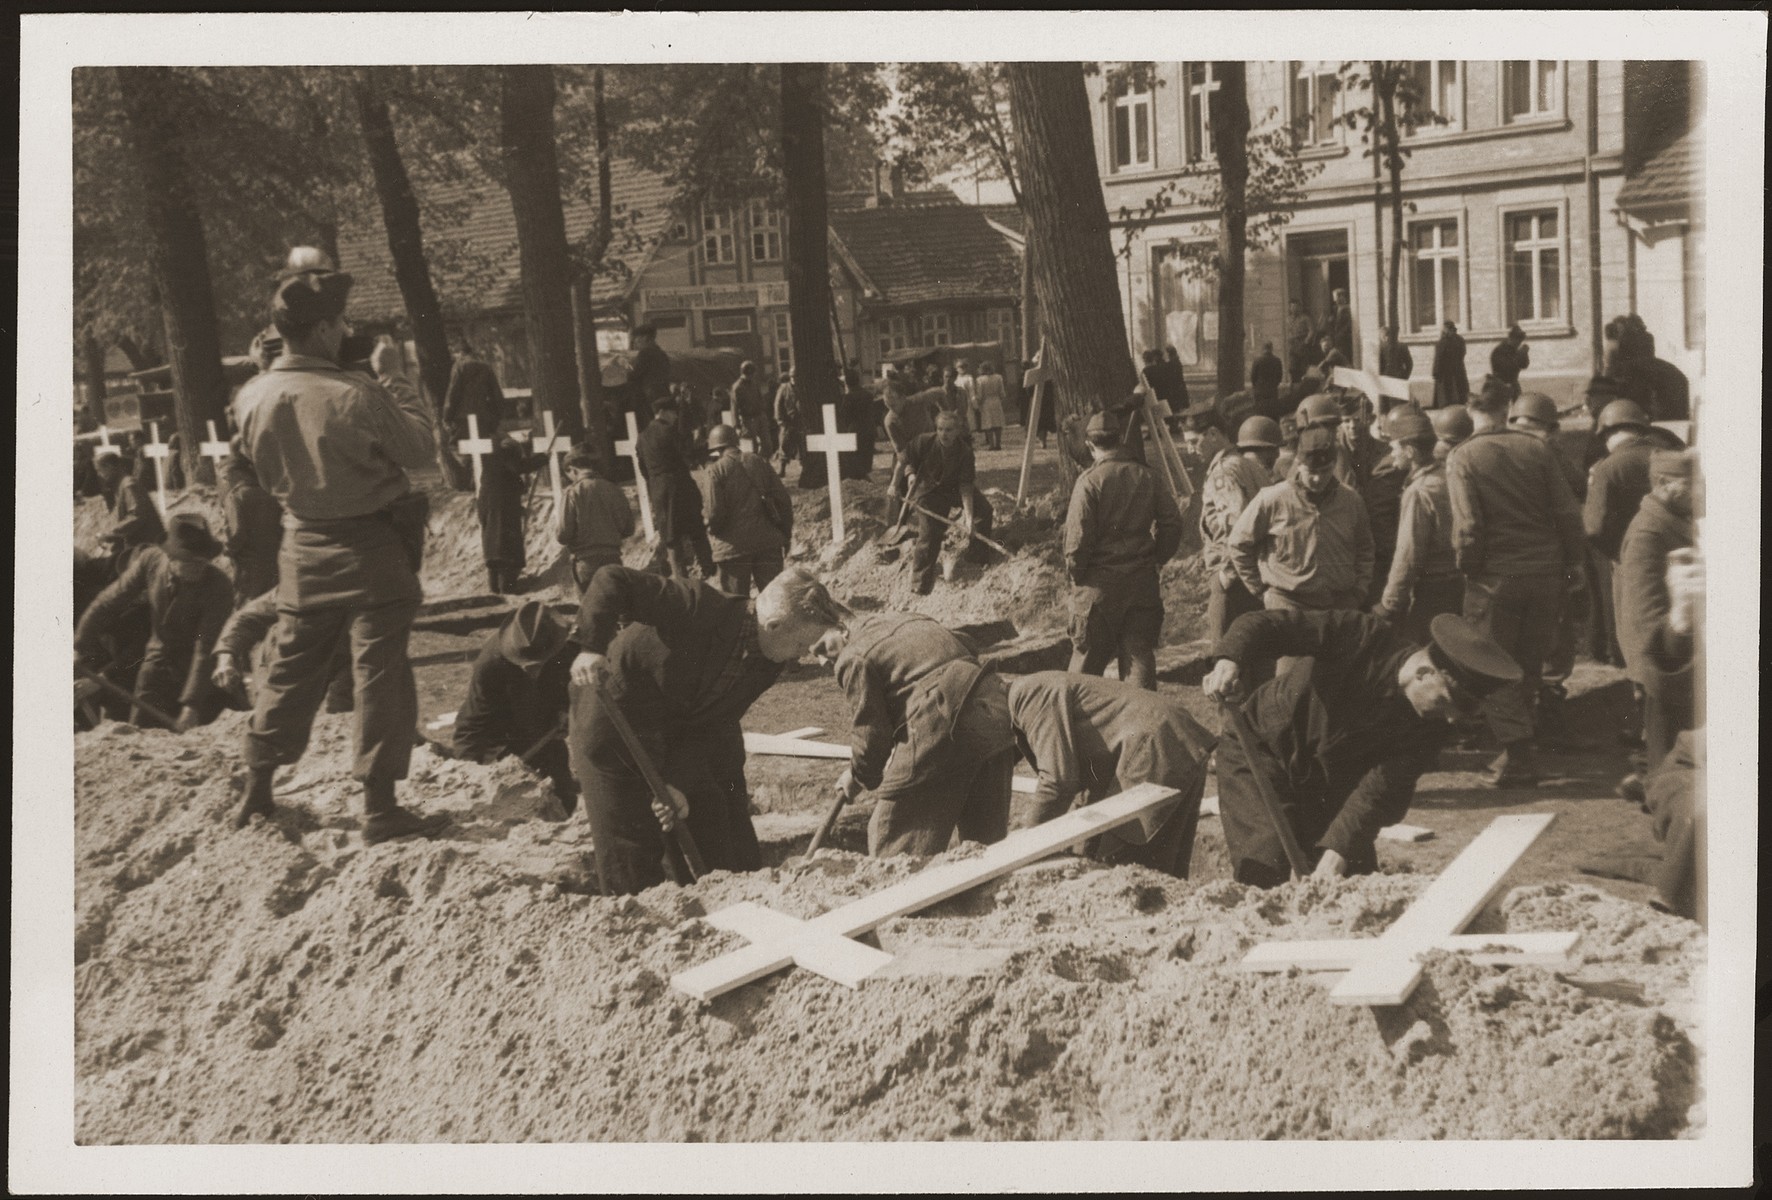 The population of Ludwigslust digs graves on the palace grounds of the Archduke of Mecklenburg, where they have been forced by U.S. troops to bury the bodies of prisoners killed in the Woebbelin concentration camp.